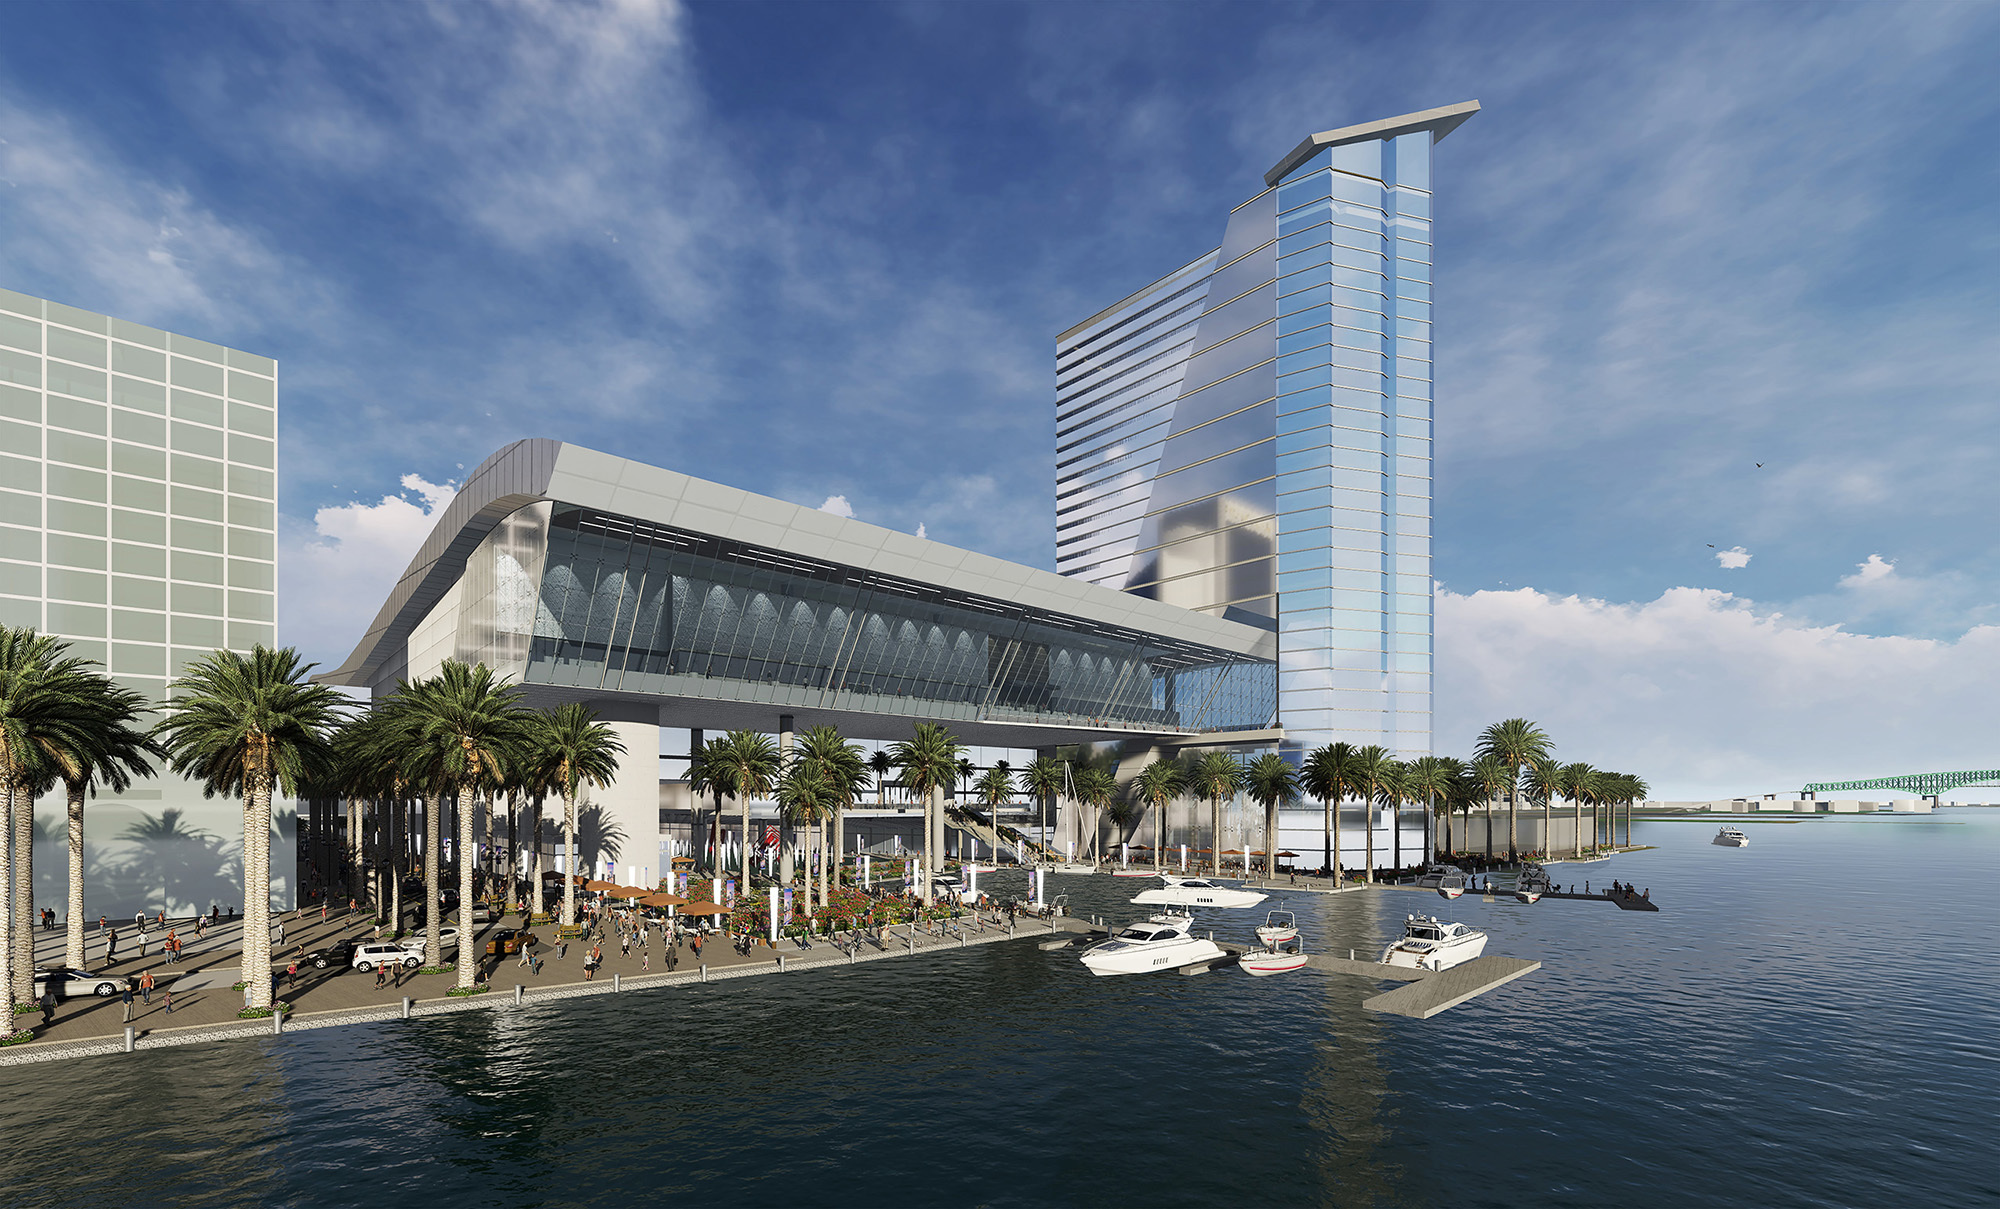 Jacobs proposed a 843,000-square-foot convention center and 190,000-square-foot covered civic plaza with a marina.